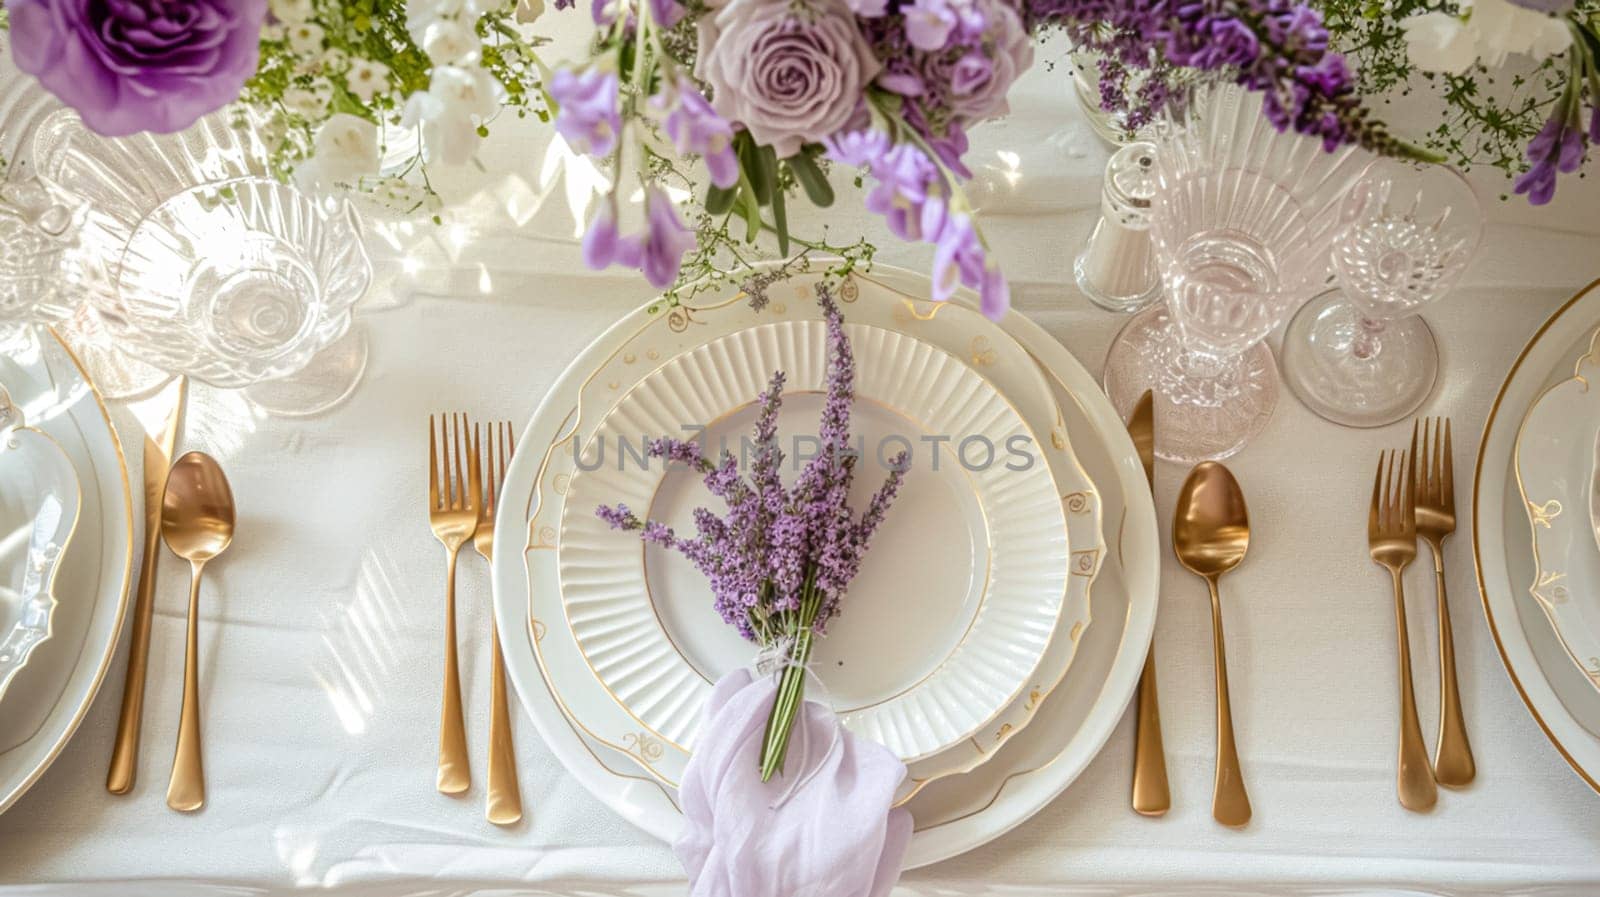 Wedding table decoration with lavender flowers, sweets, cake and candles